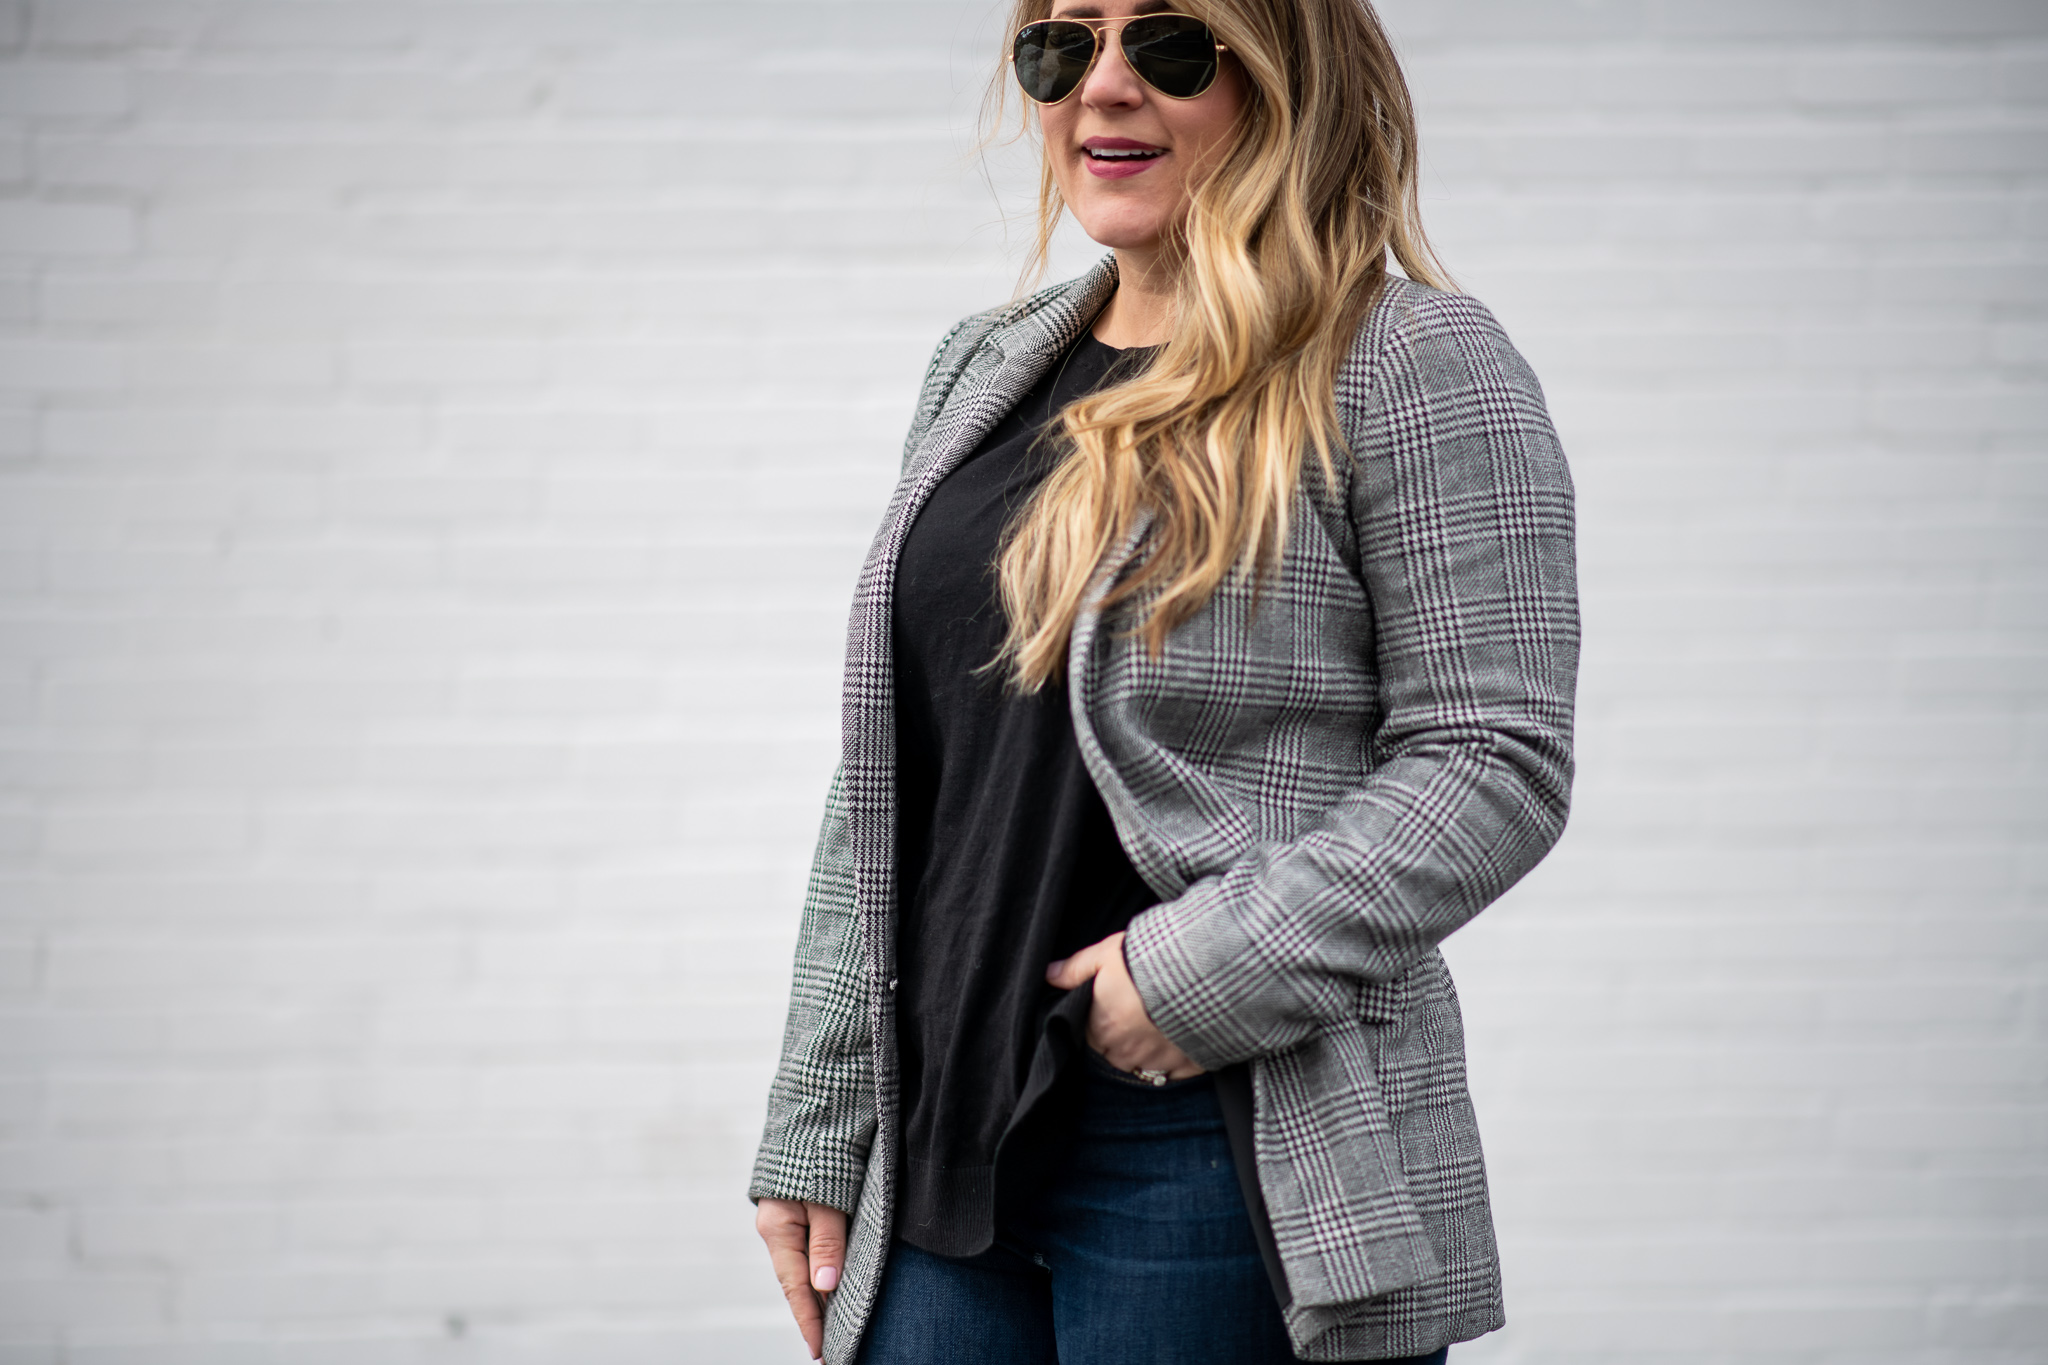 Black and White Plaid Blazer featured by top US fashion blog Coffee Beans and Bobby Pins; Image of a woman wearing J.Crew jeans, Christian Louboutin heels, Gap blazer and Express sweater.